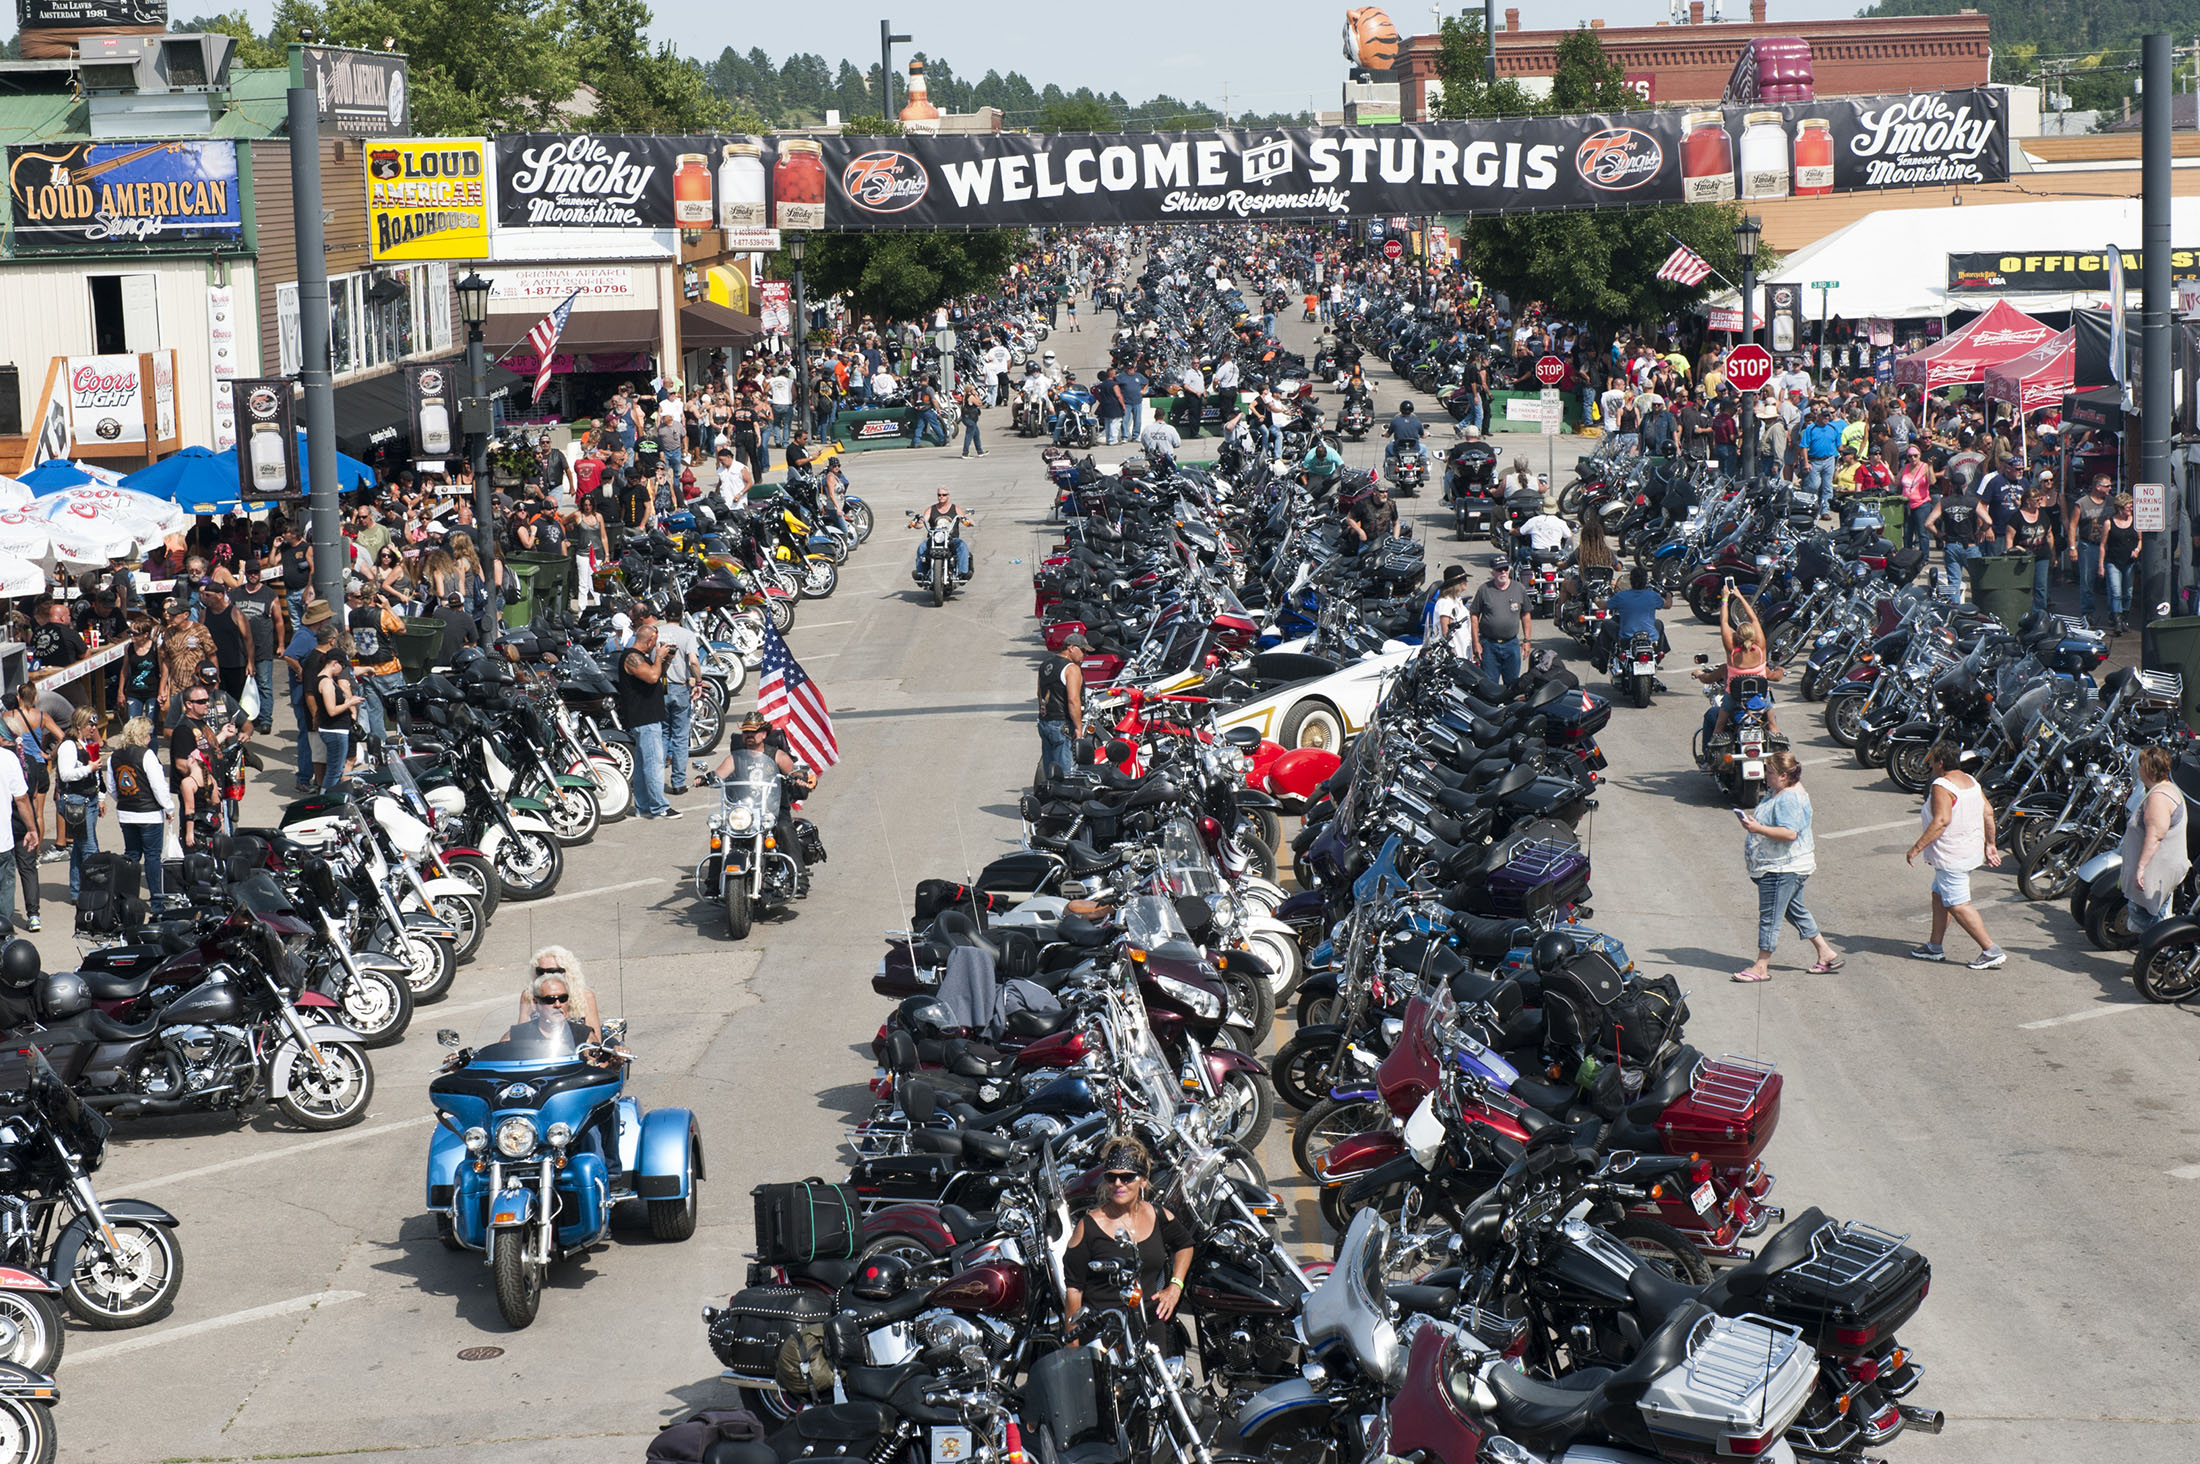 Annual Sturgis Rally Expecting 250K, Stirring Virus Concerns - Bloomberg